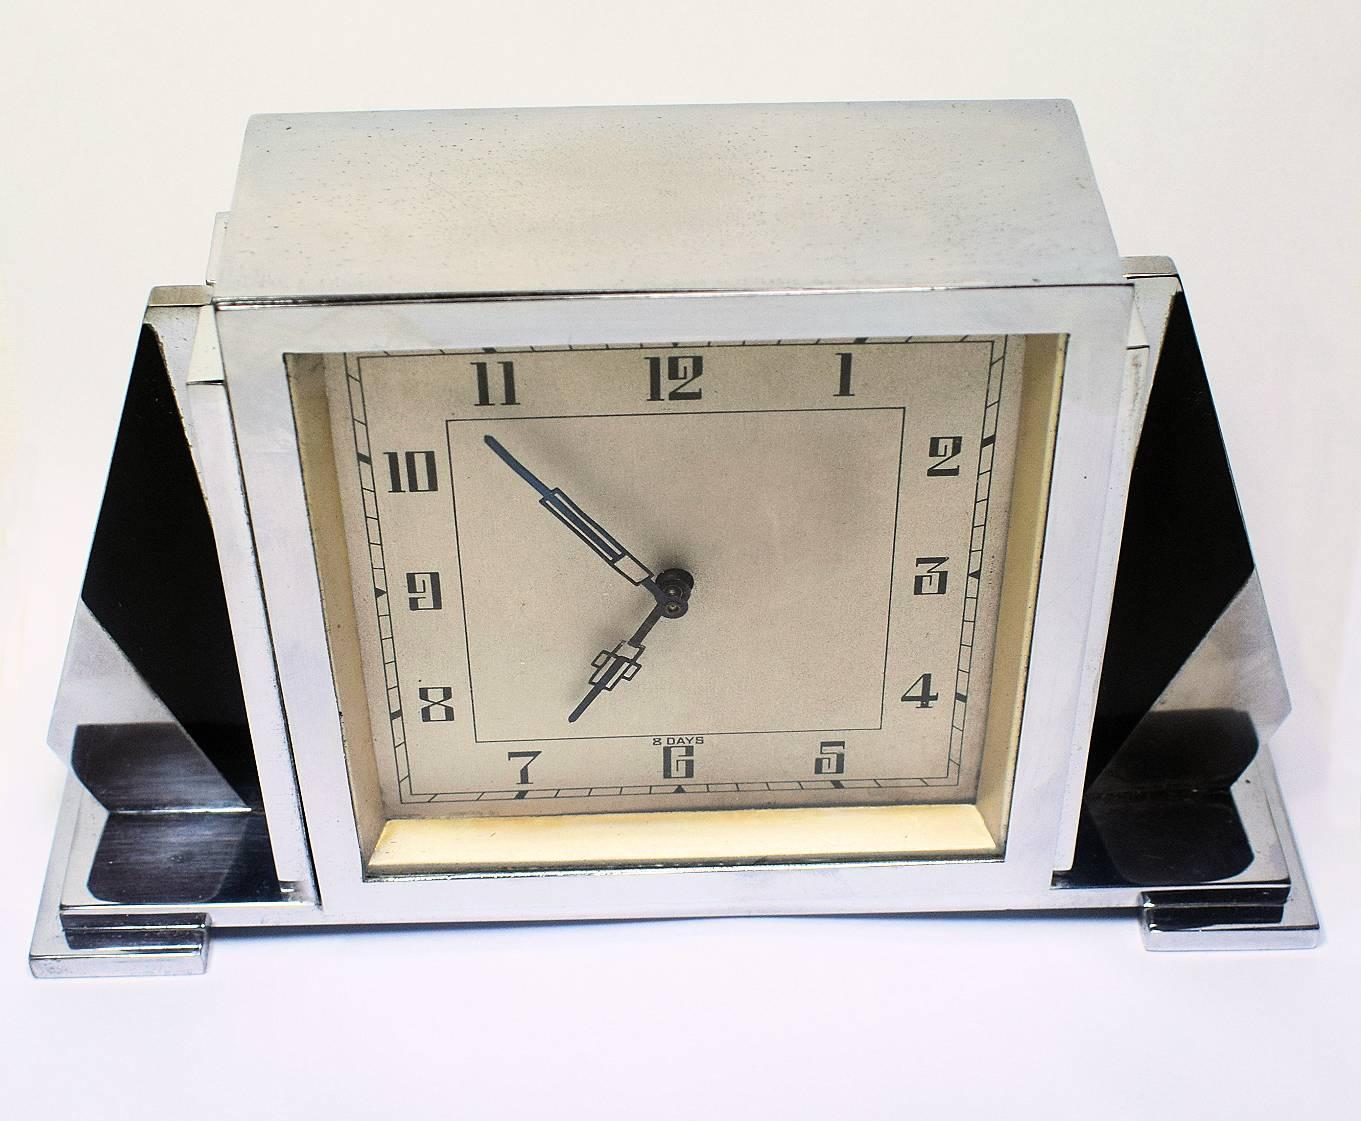 For your consideration is this rather stylish English Art Deco chrome clock with an 8 day movement. Deceptively heavy and of a good quality build. On the back of the clock reads 'British Made'. The black and chrome side fins make this a very